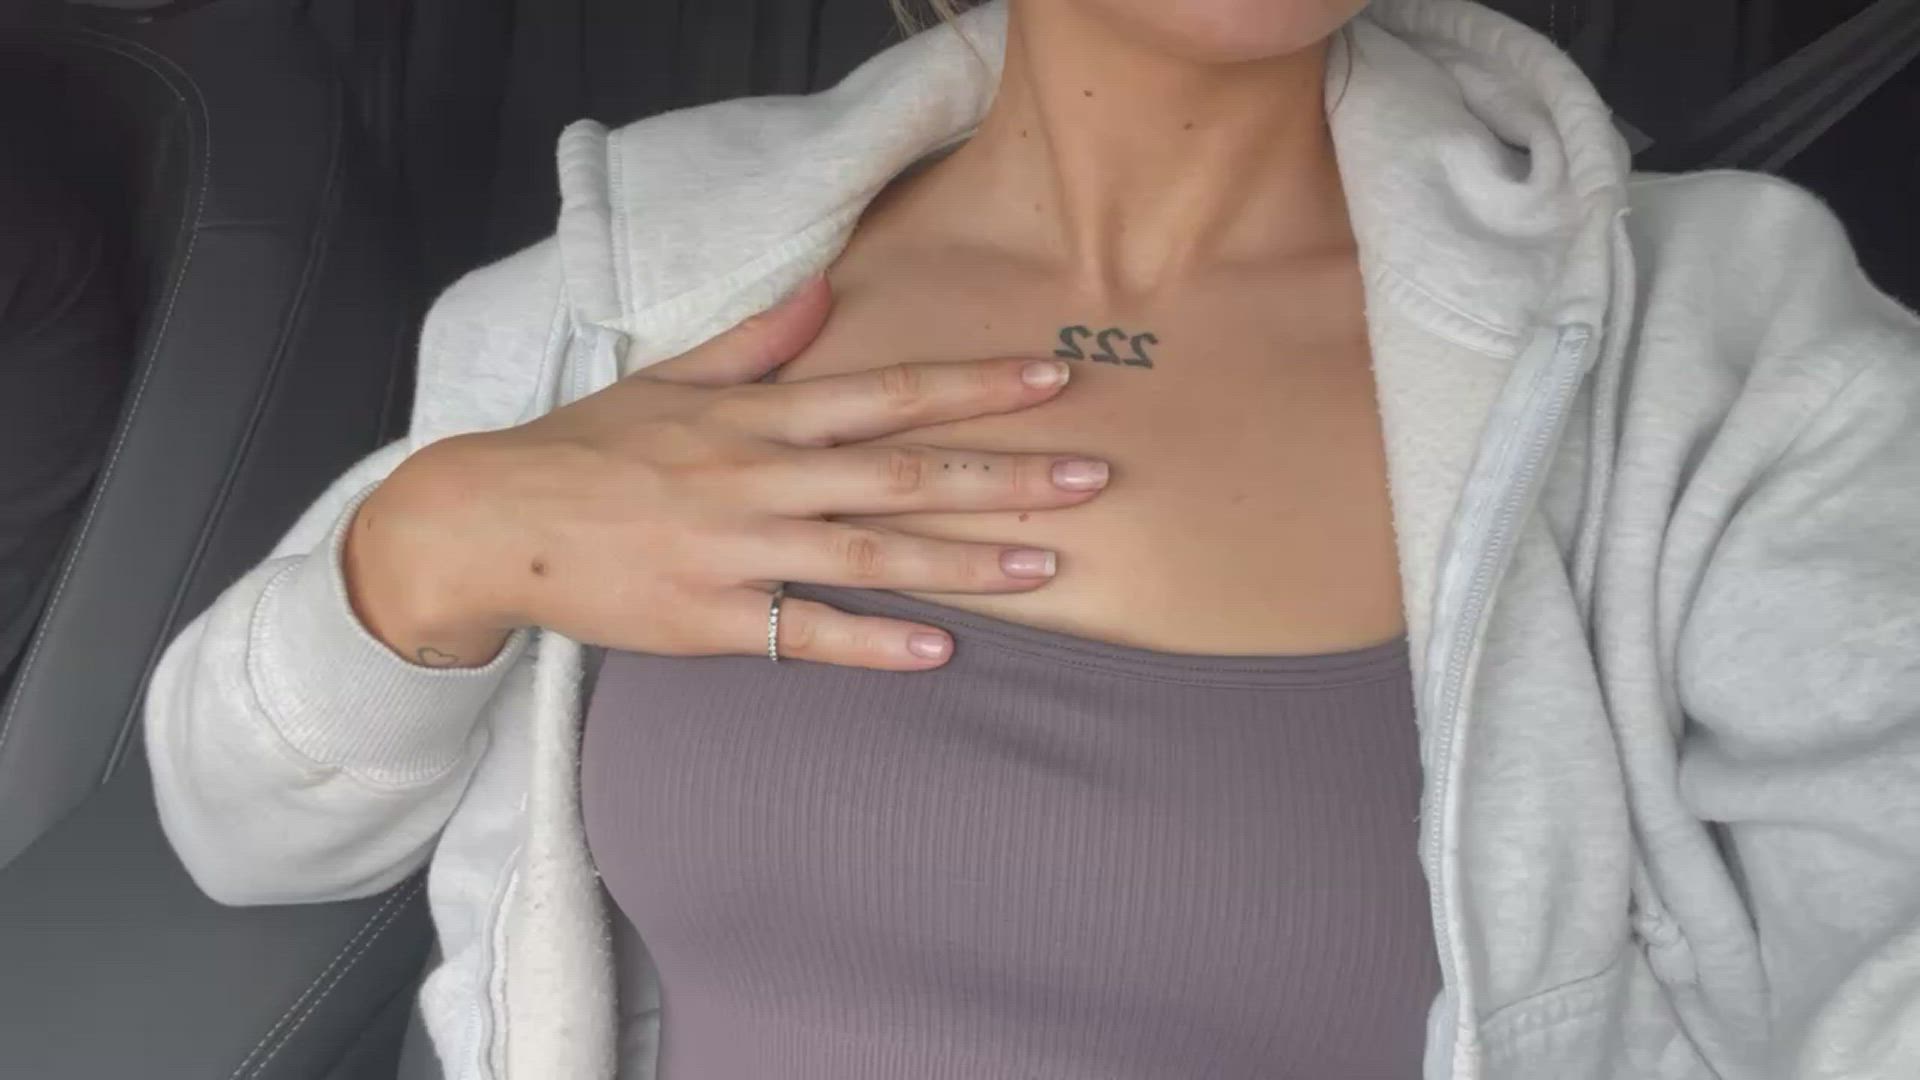 Big Tits porn video with onlyfans model lowjenx <strong>@lowjenx</strong>